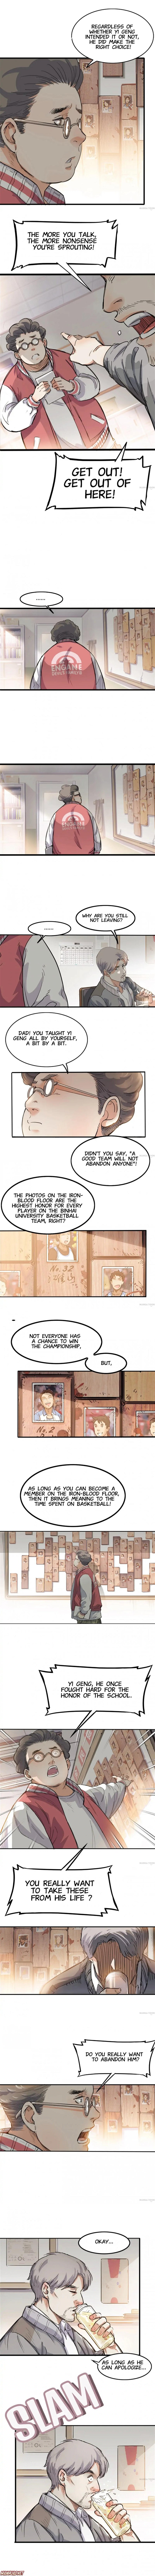 Streetball in the Hood Chapter 4 - Page 1